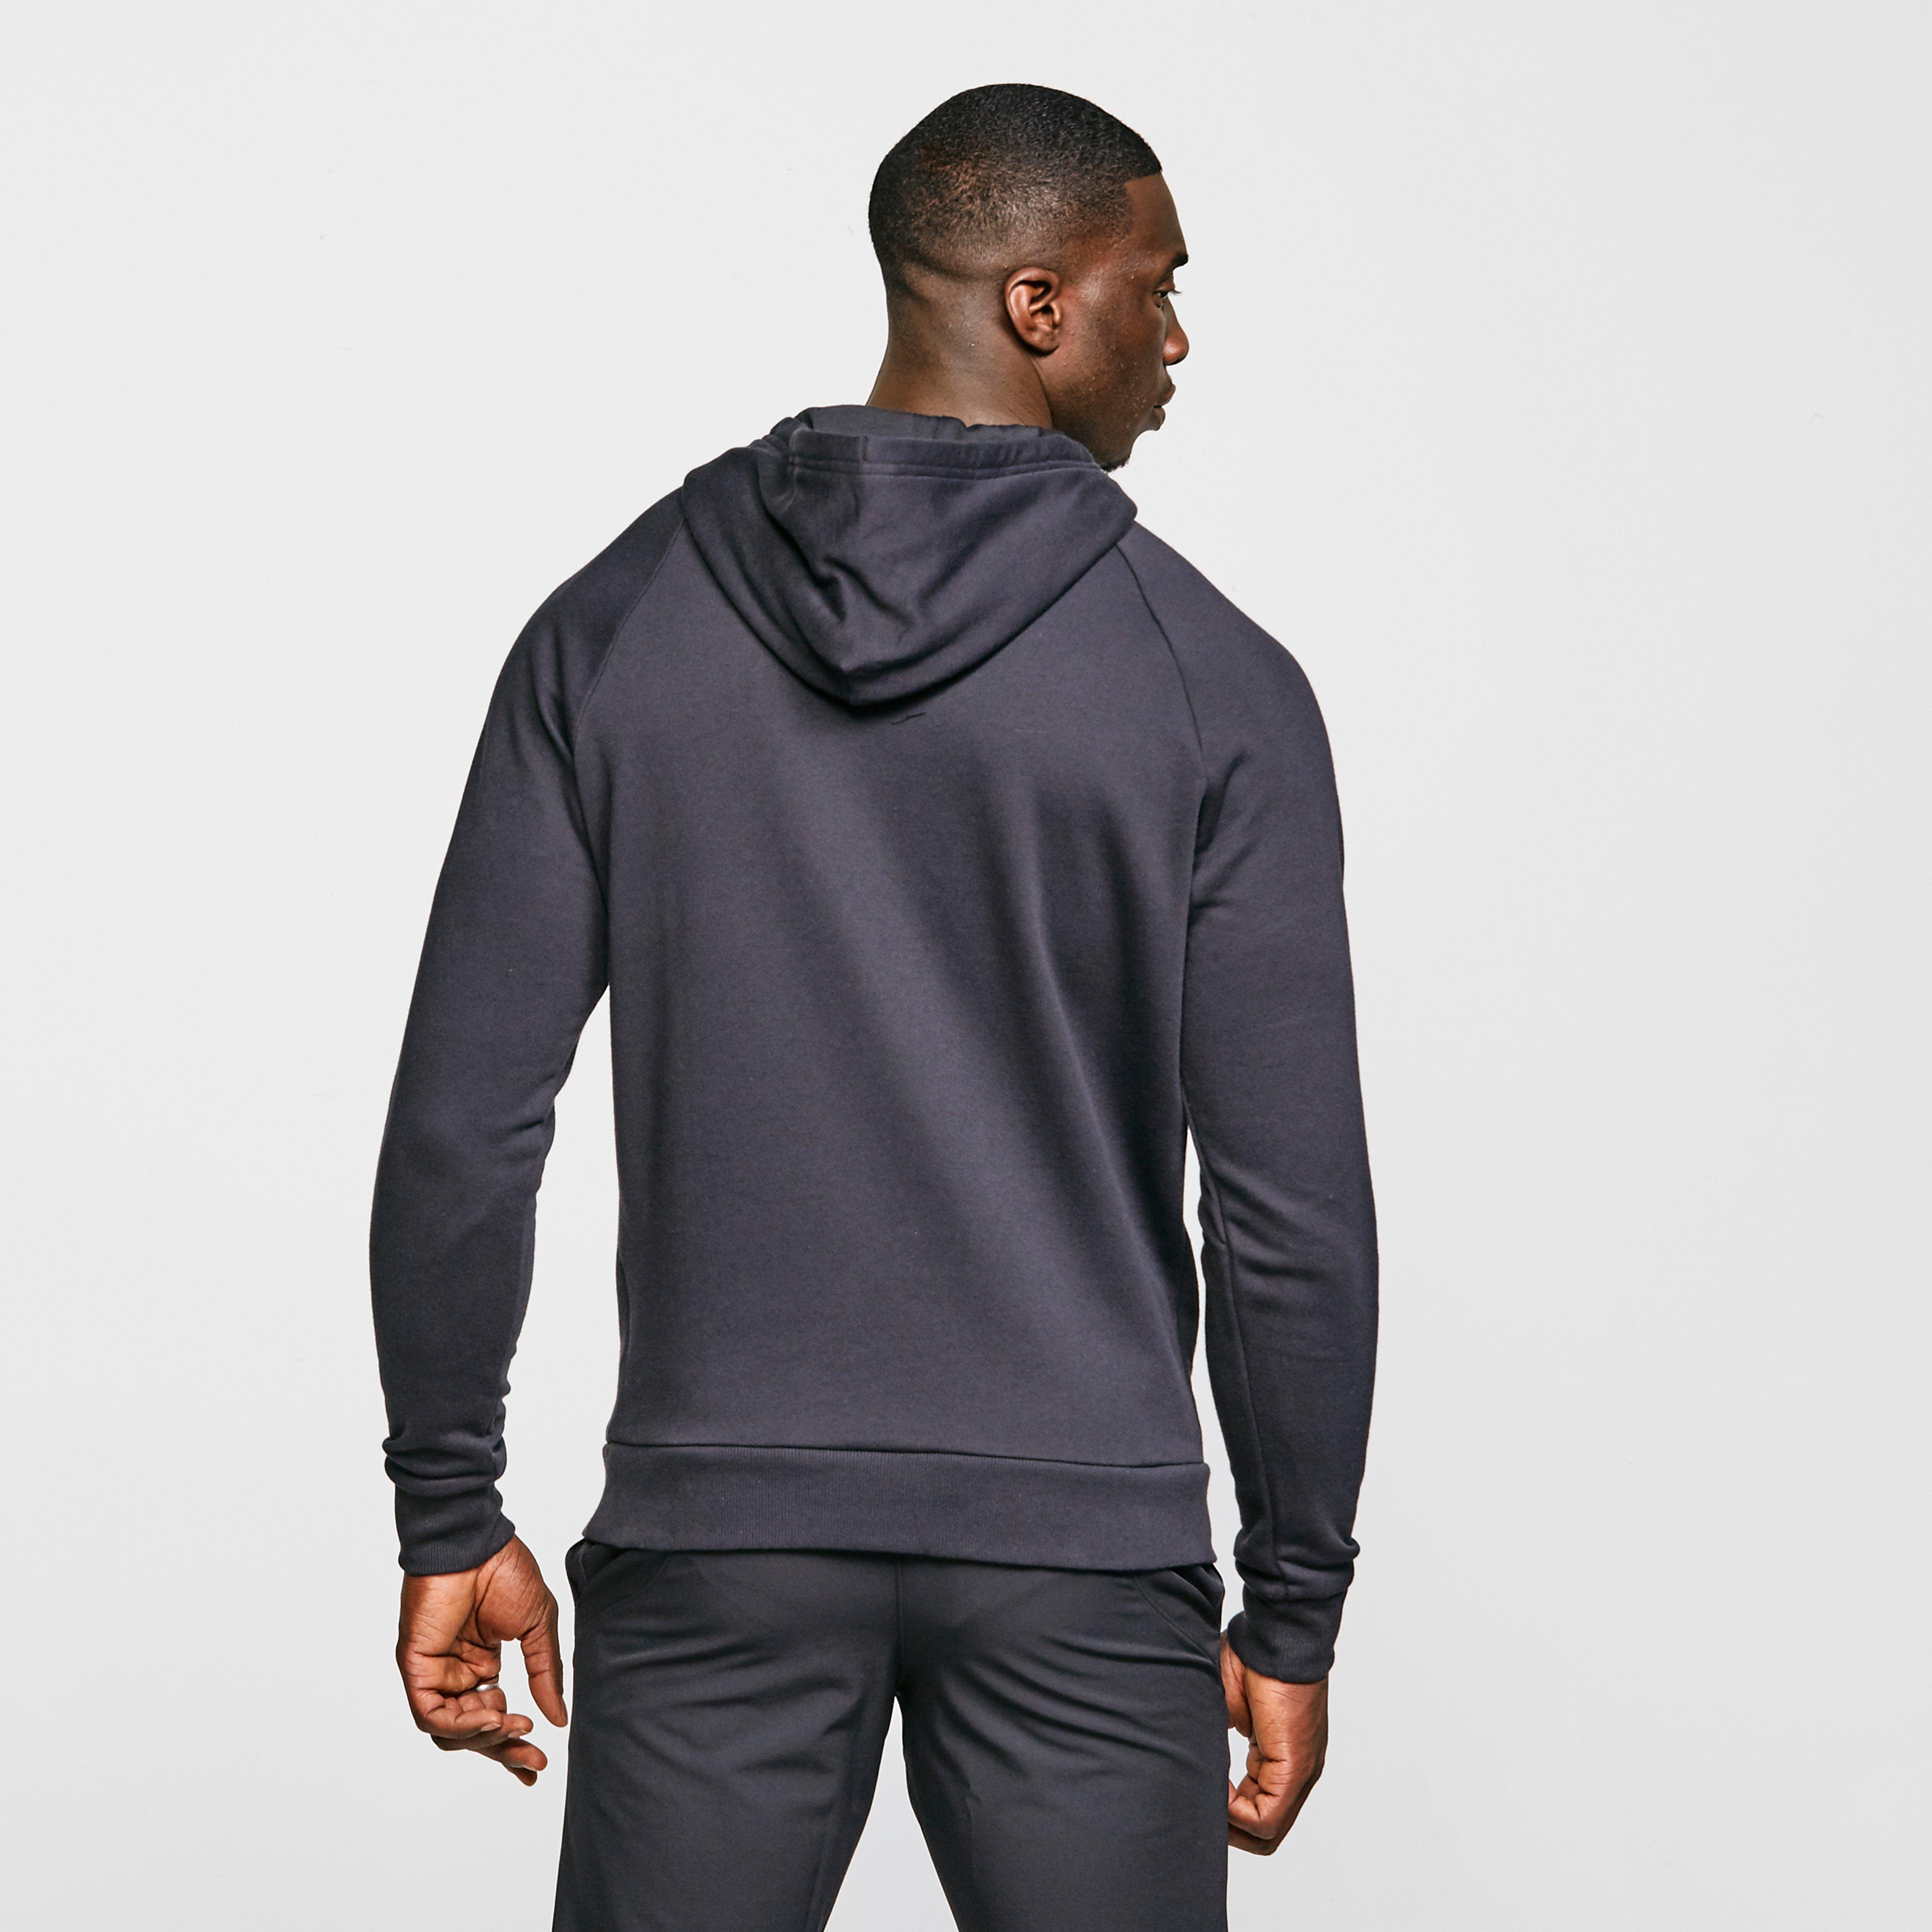 Under Armour Rival Fleece Logo Hoodie Review